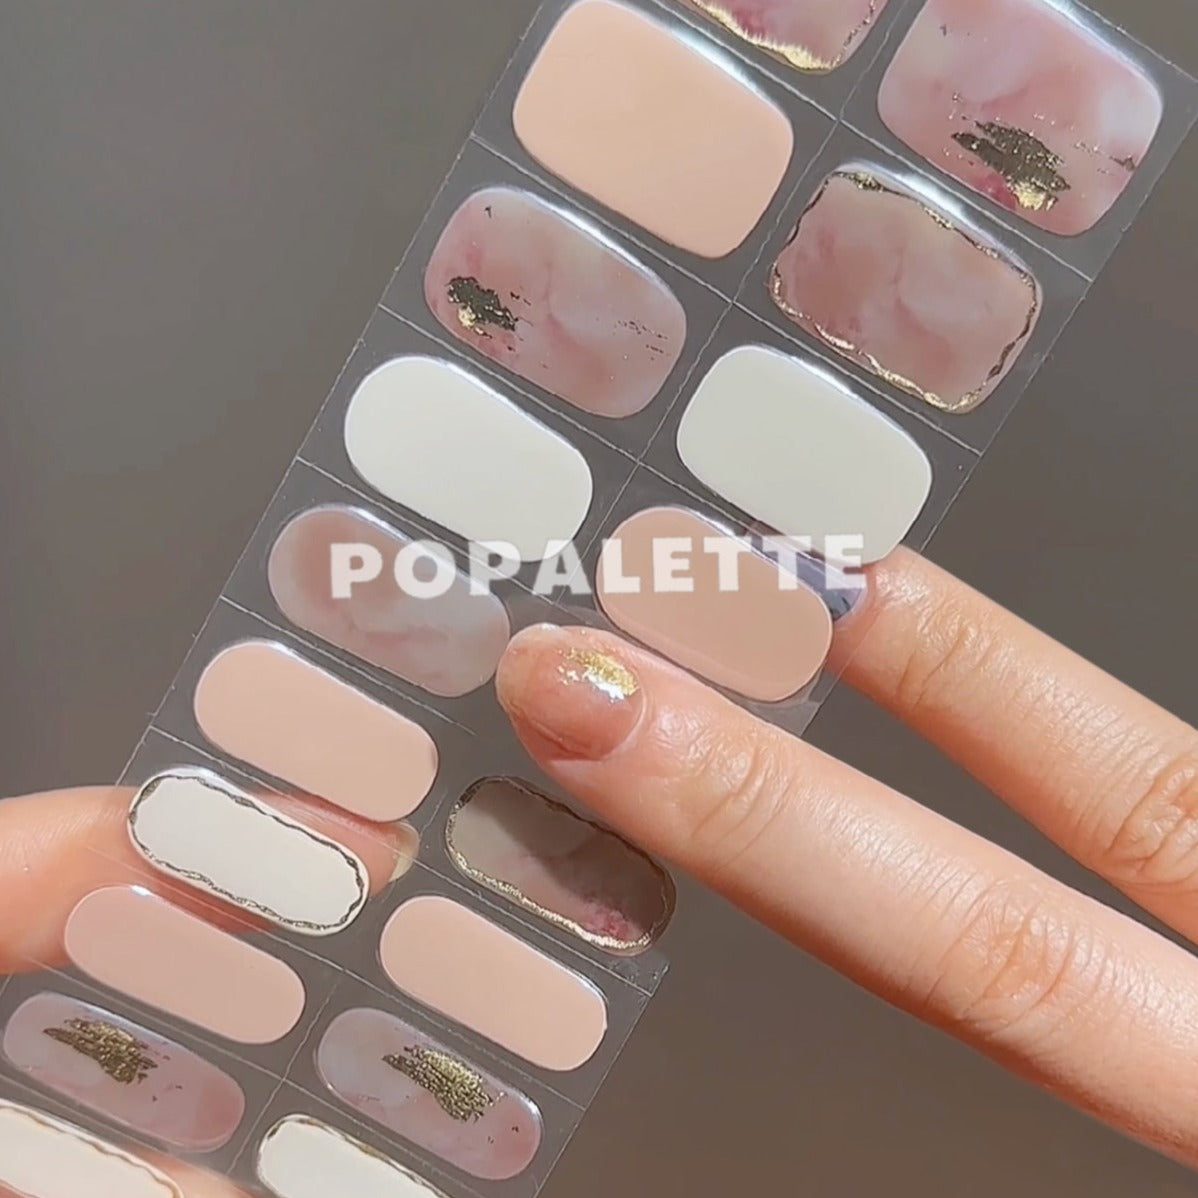 MARBLE NUDE PINK - SEMI-CURED DIY MANICURE GEL NAIL STICKERS 20 STRIPS